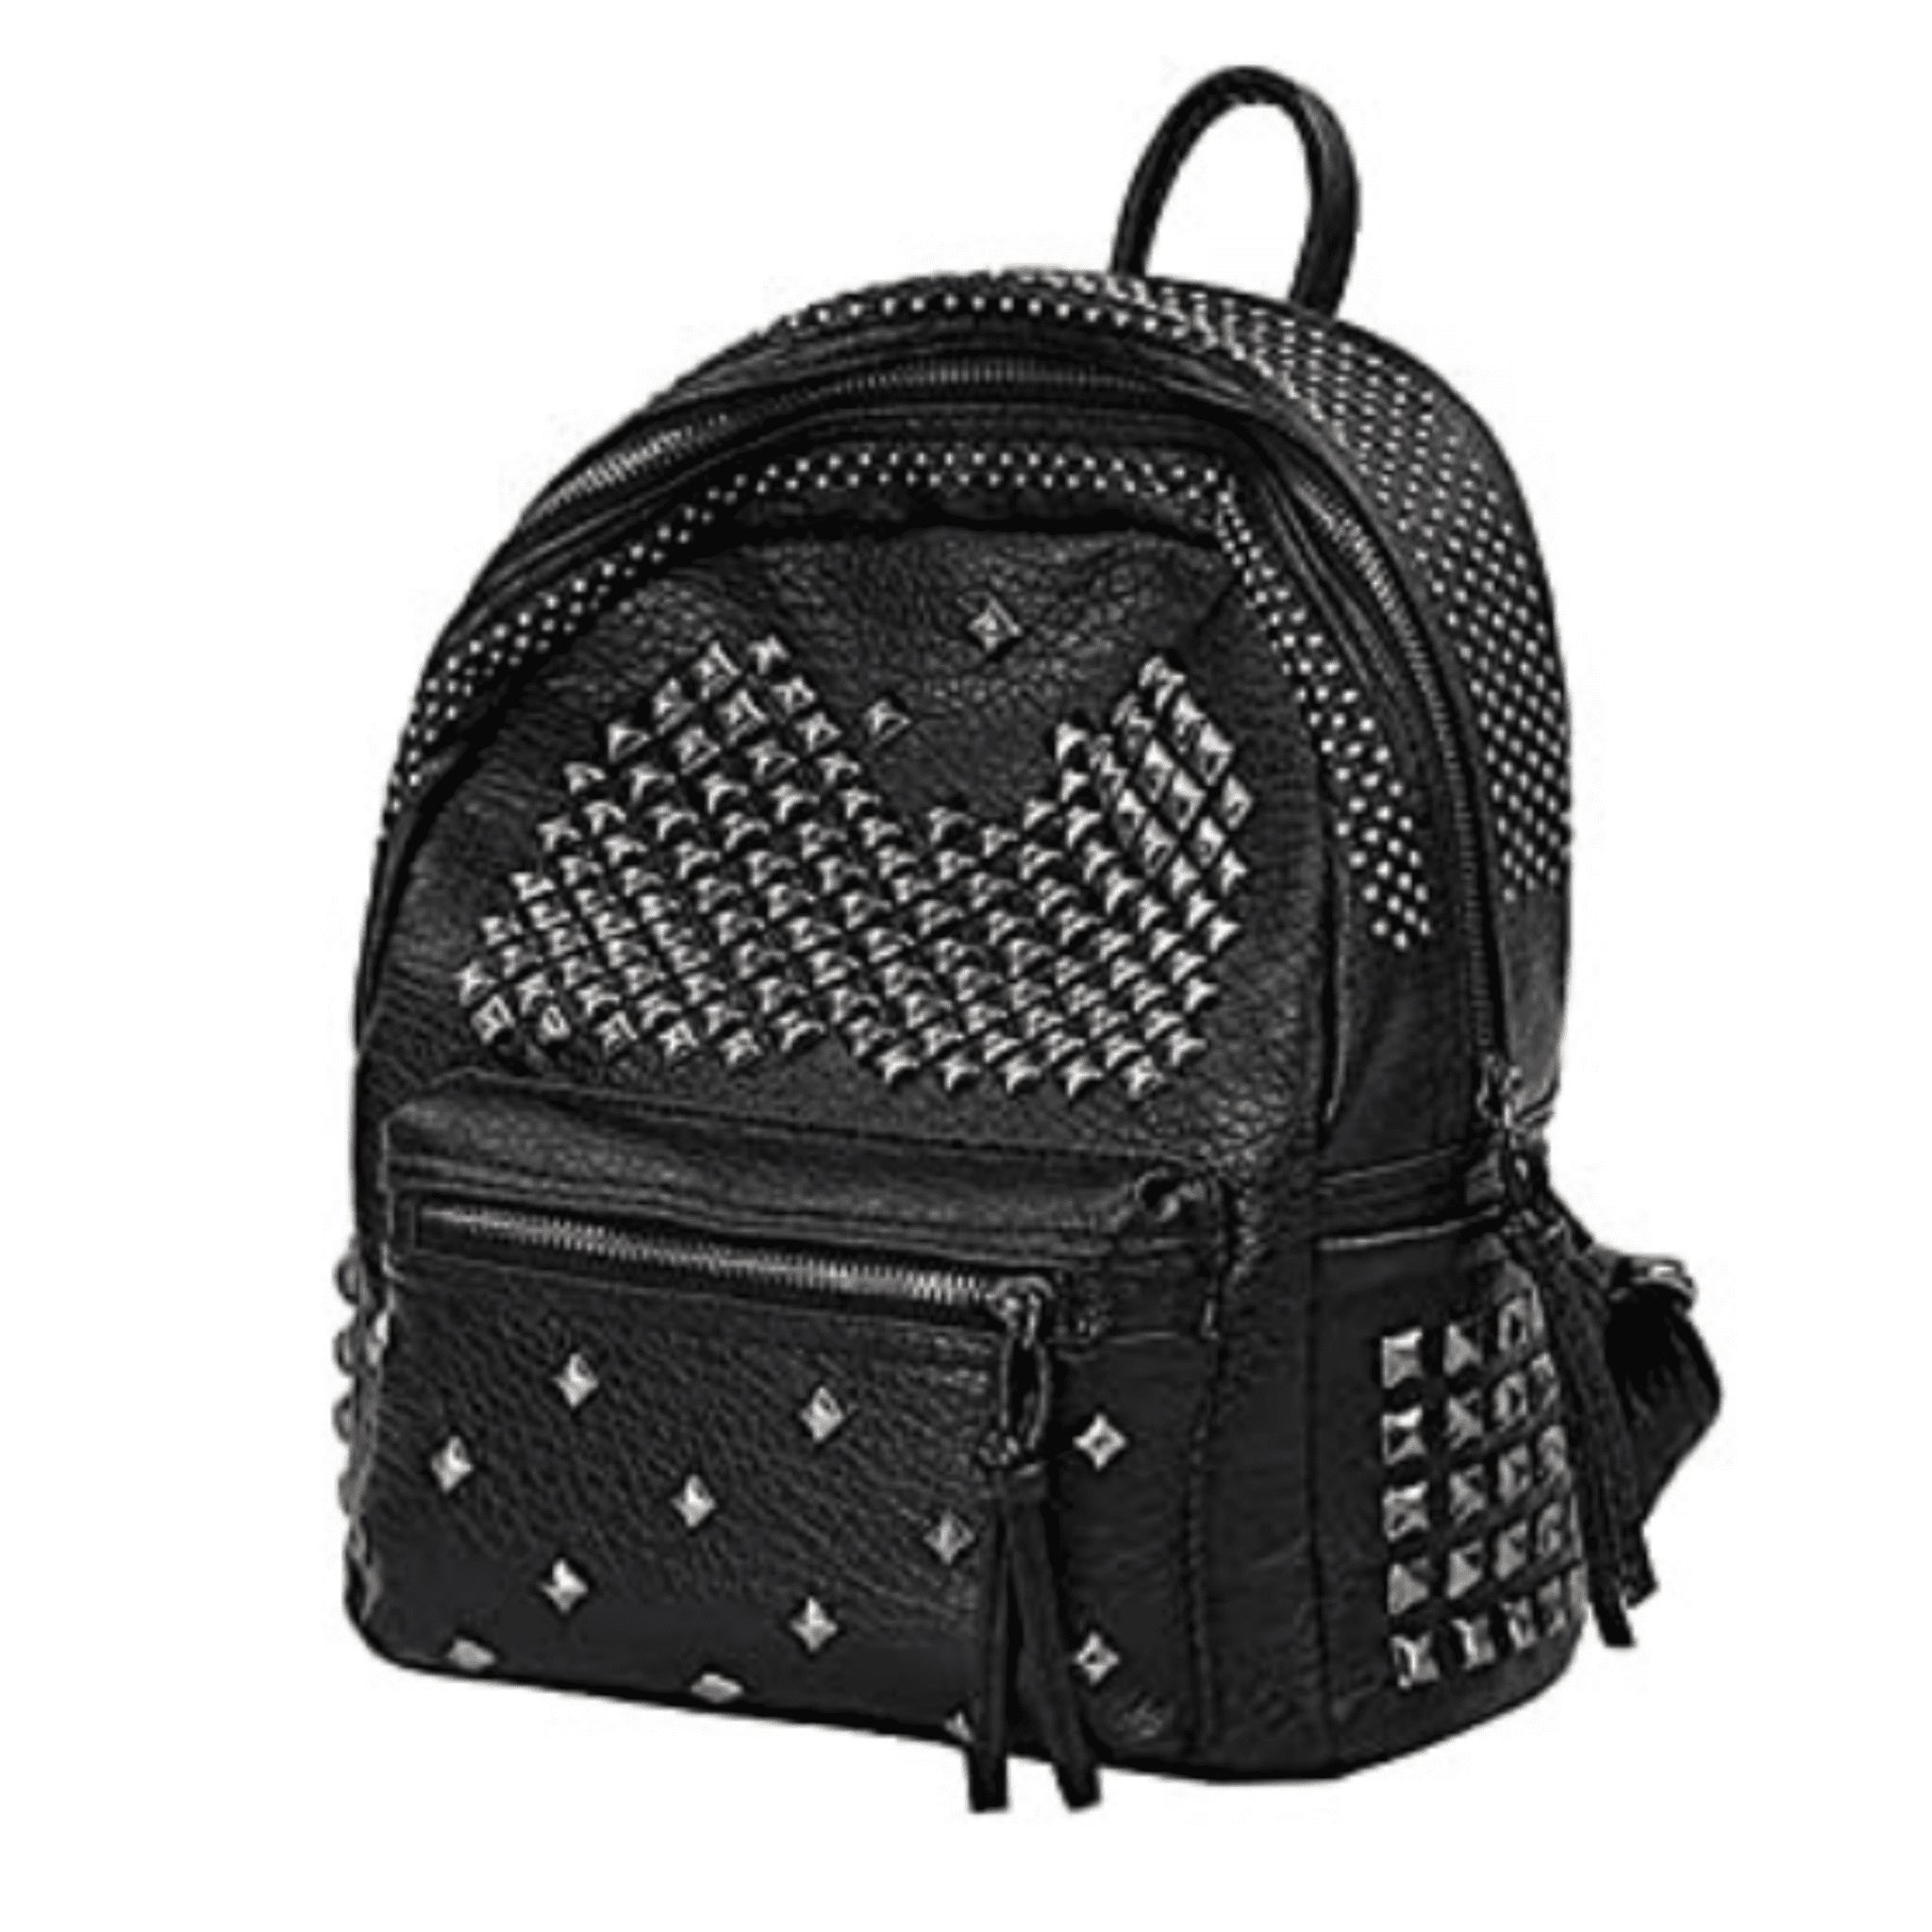 Black Studded Backpack with silver metal accents.